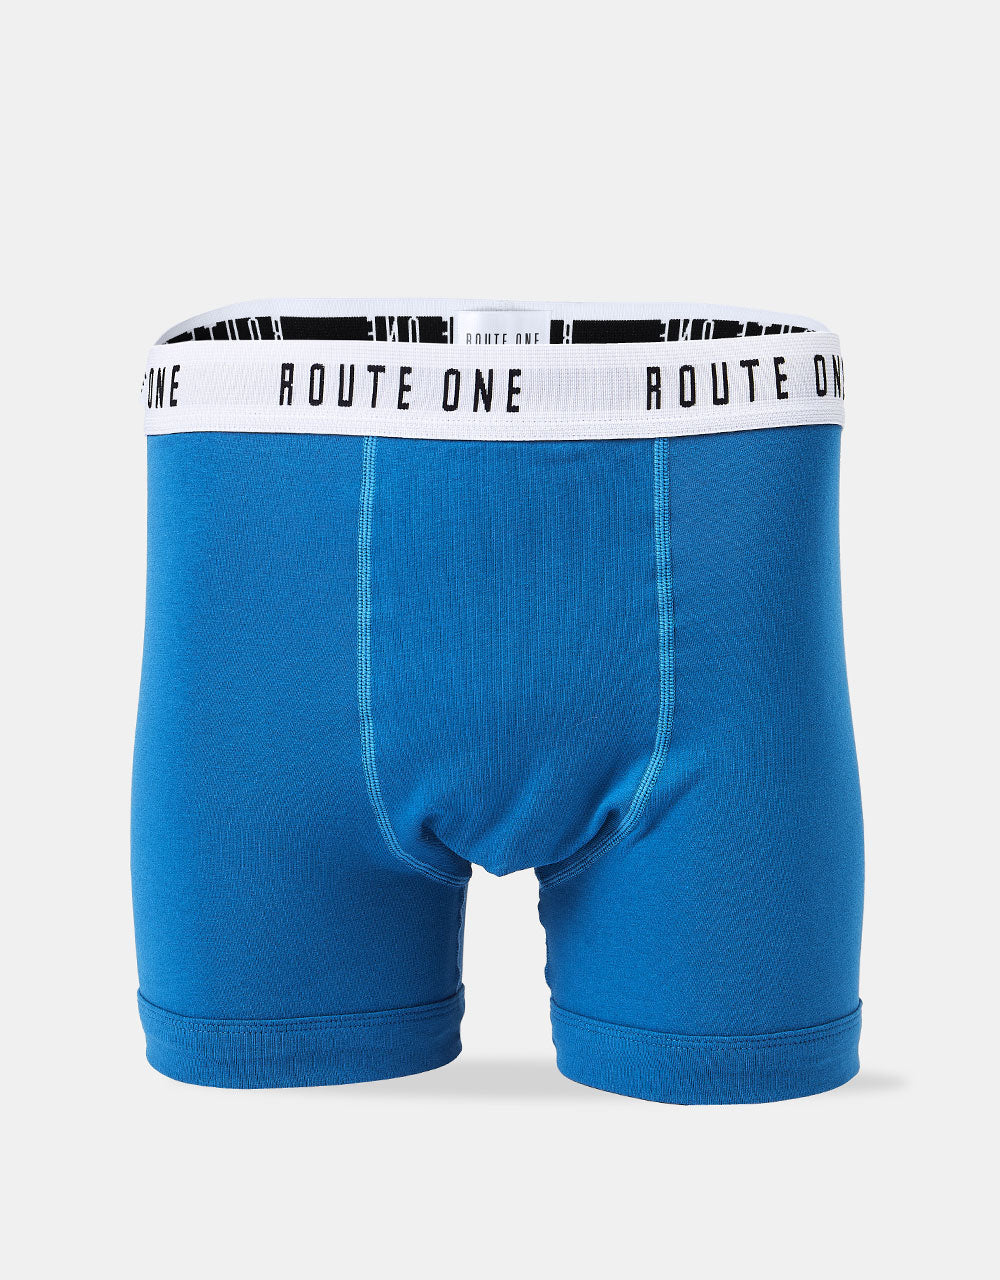 Route One Classic Boxer Shorts 3 Pack - Red/White/Blue